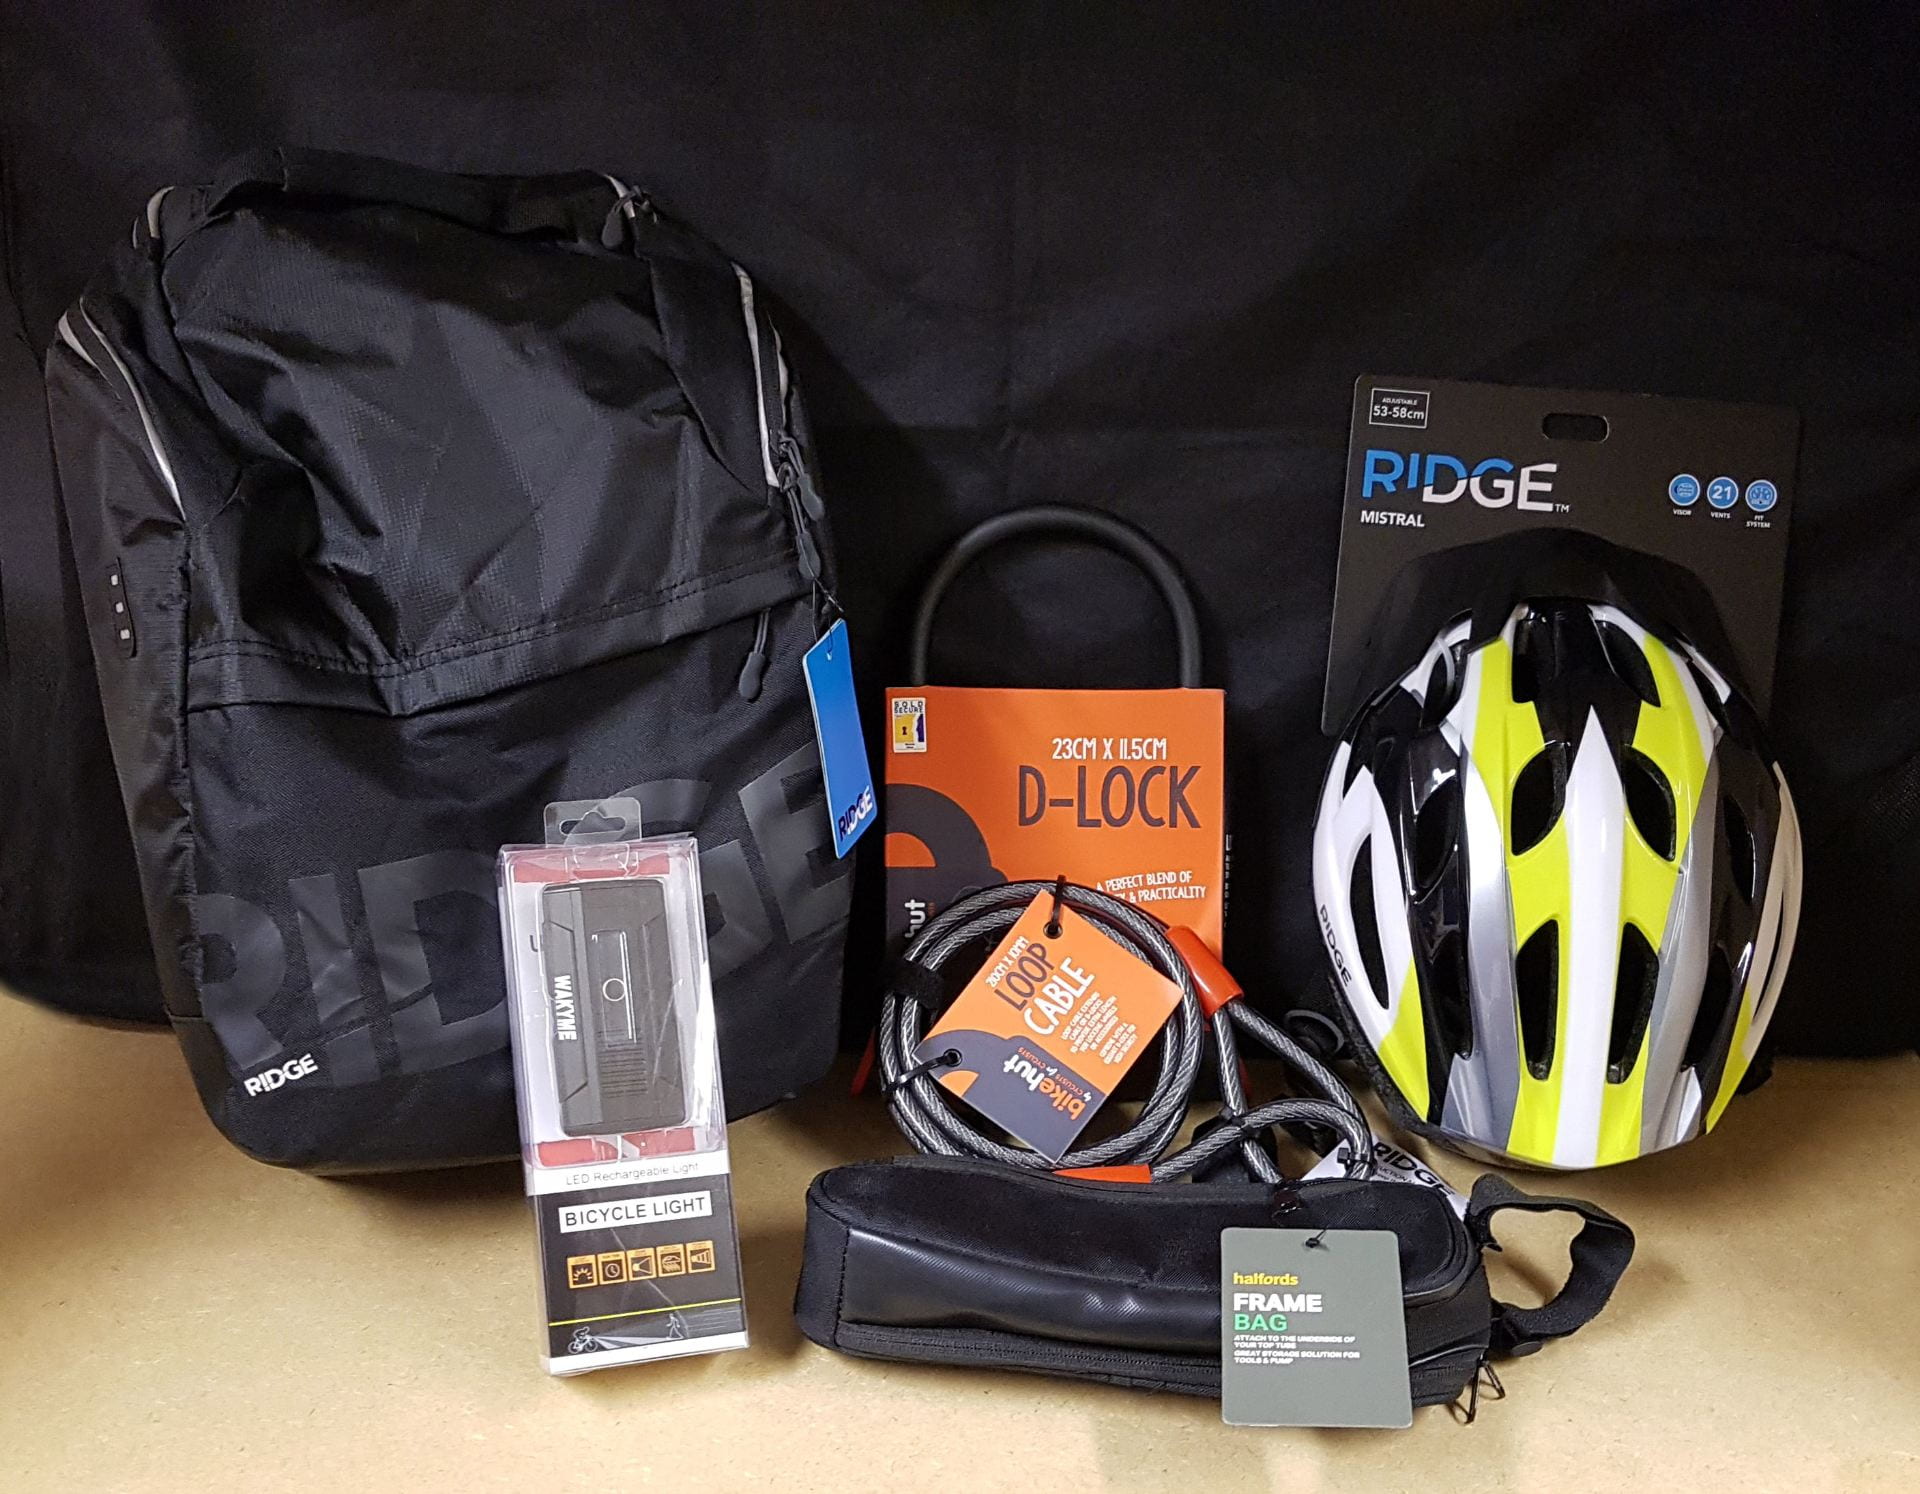 Image of cycling equipment, including a helmet, lock, lights and bag